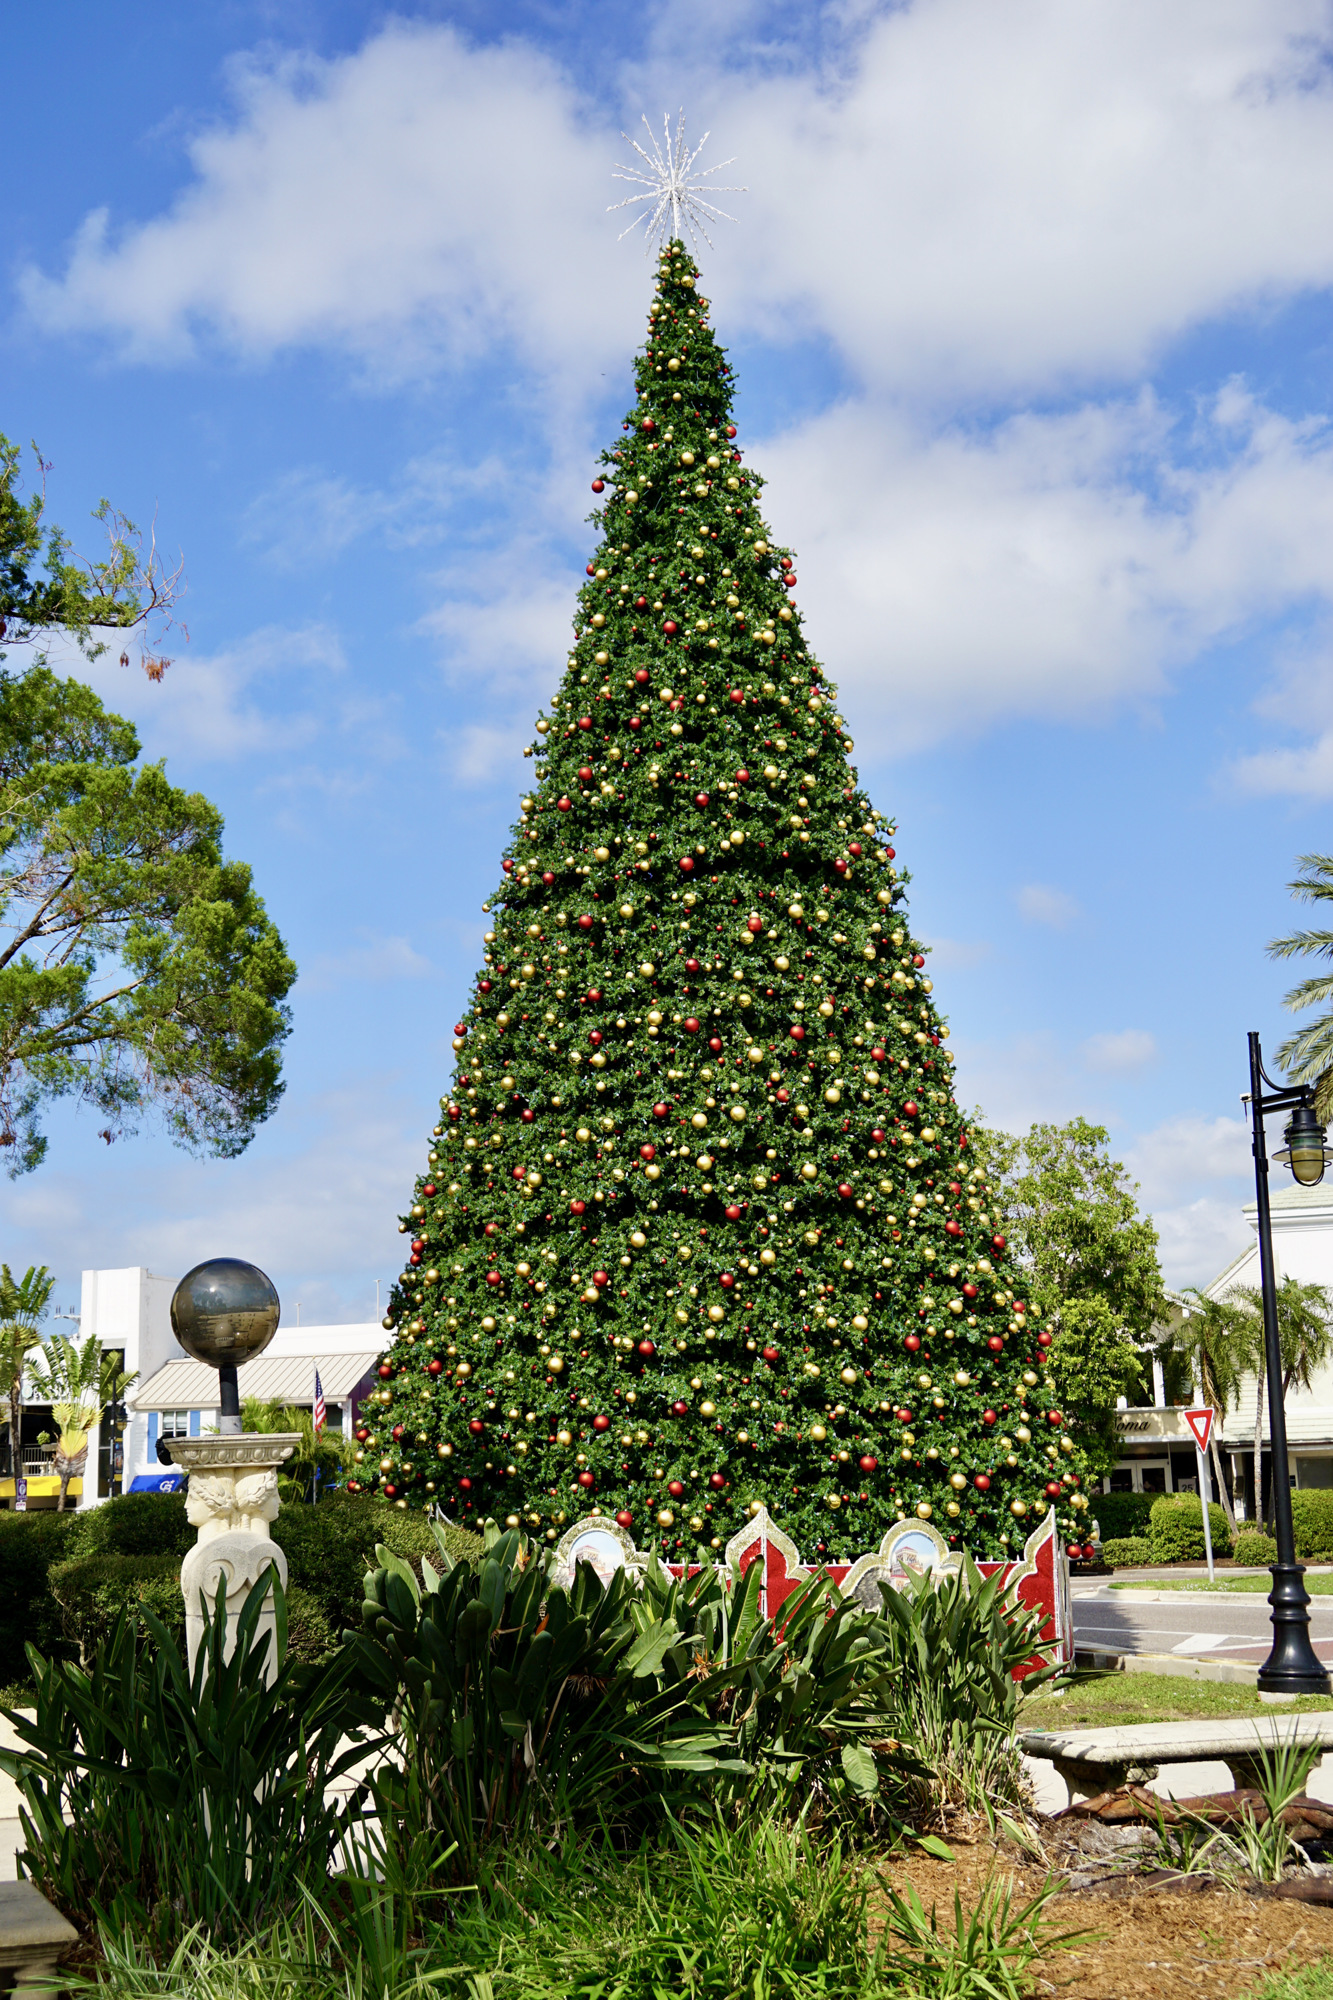 The St. Armands Circle tree will be officially lit on Dec. 2 in a small ceremony. The annual Holiday Night of Lights ceremony was recently cancelled. (Eric Garwood)